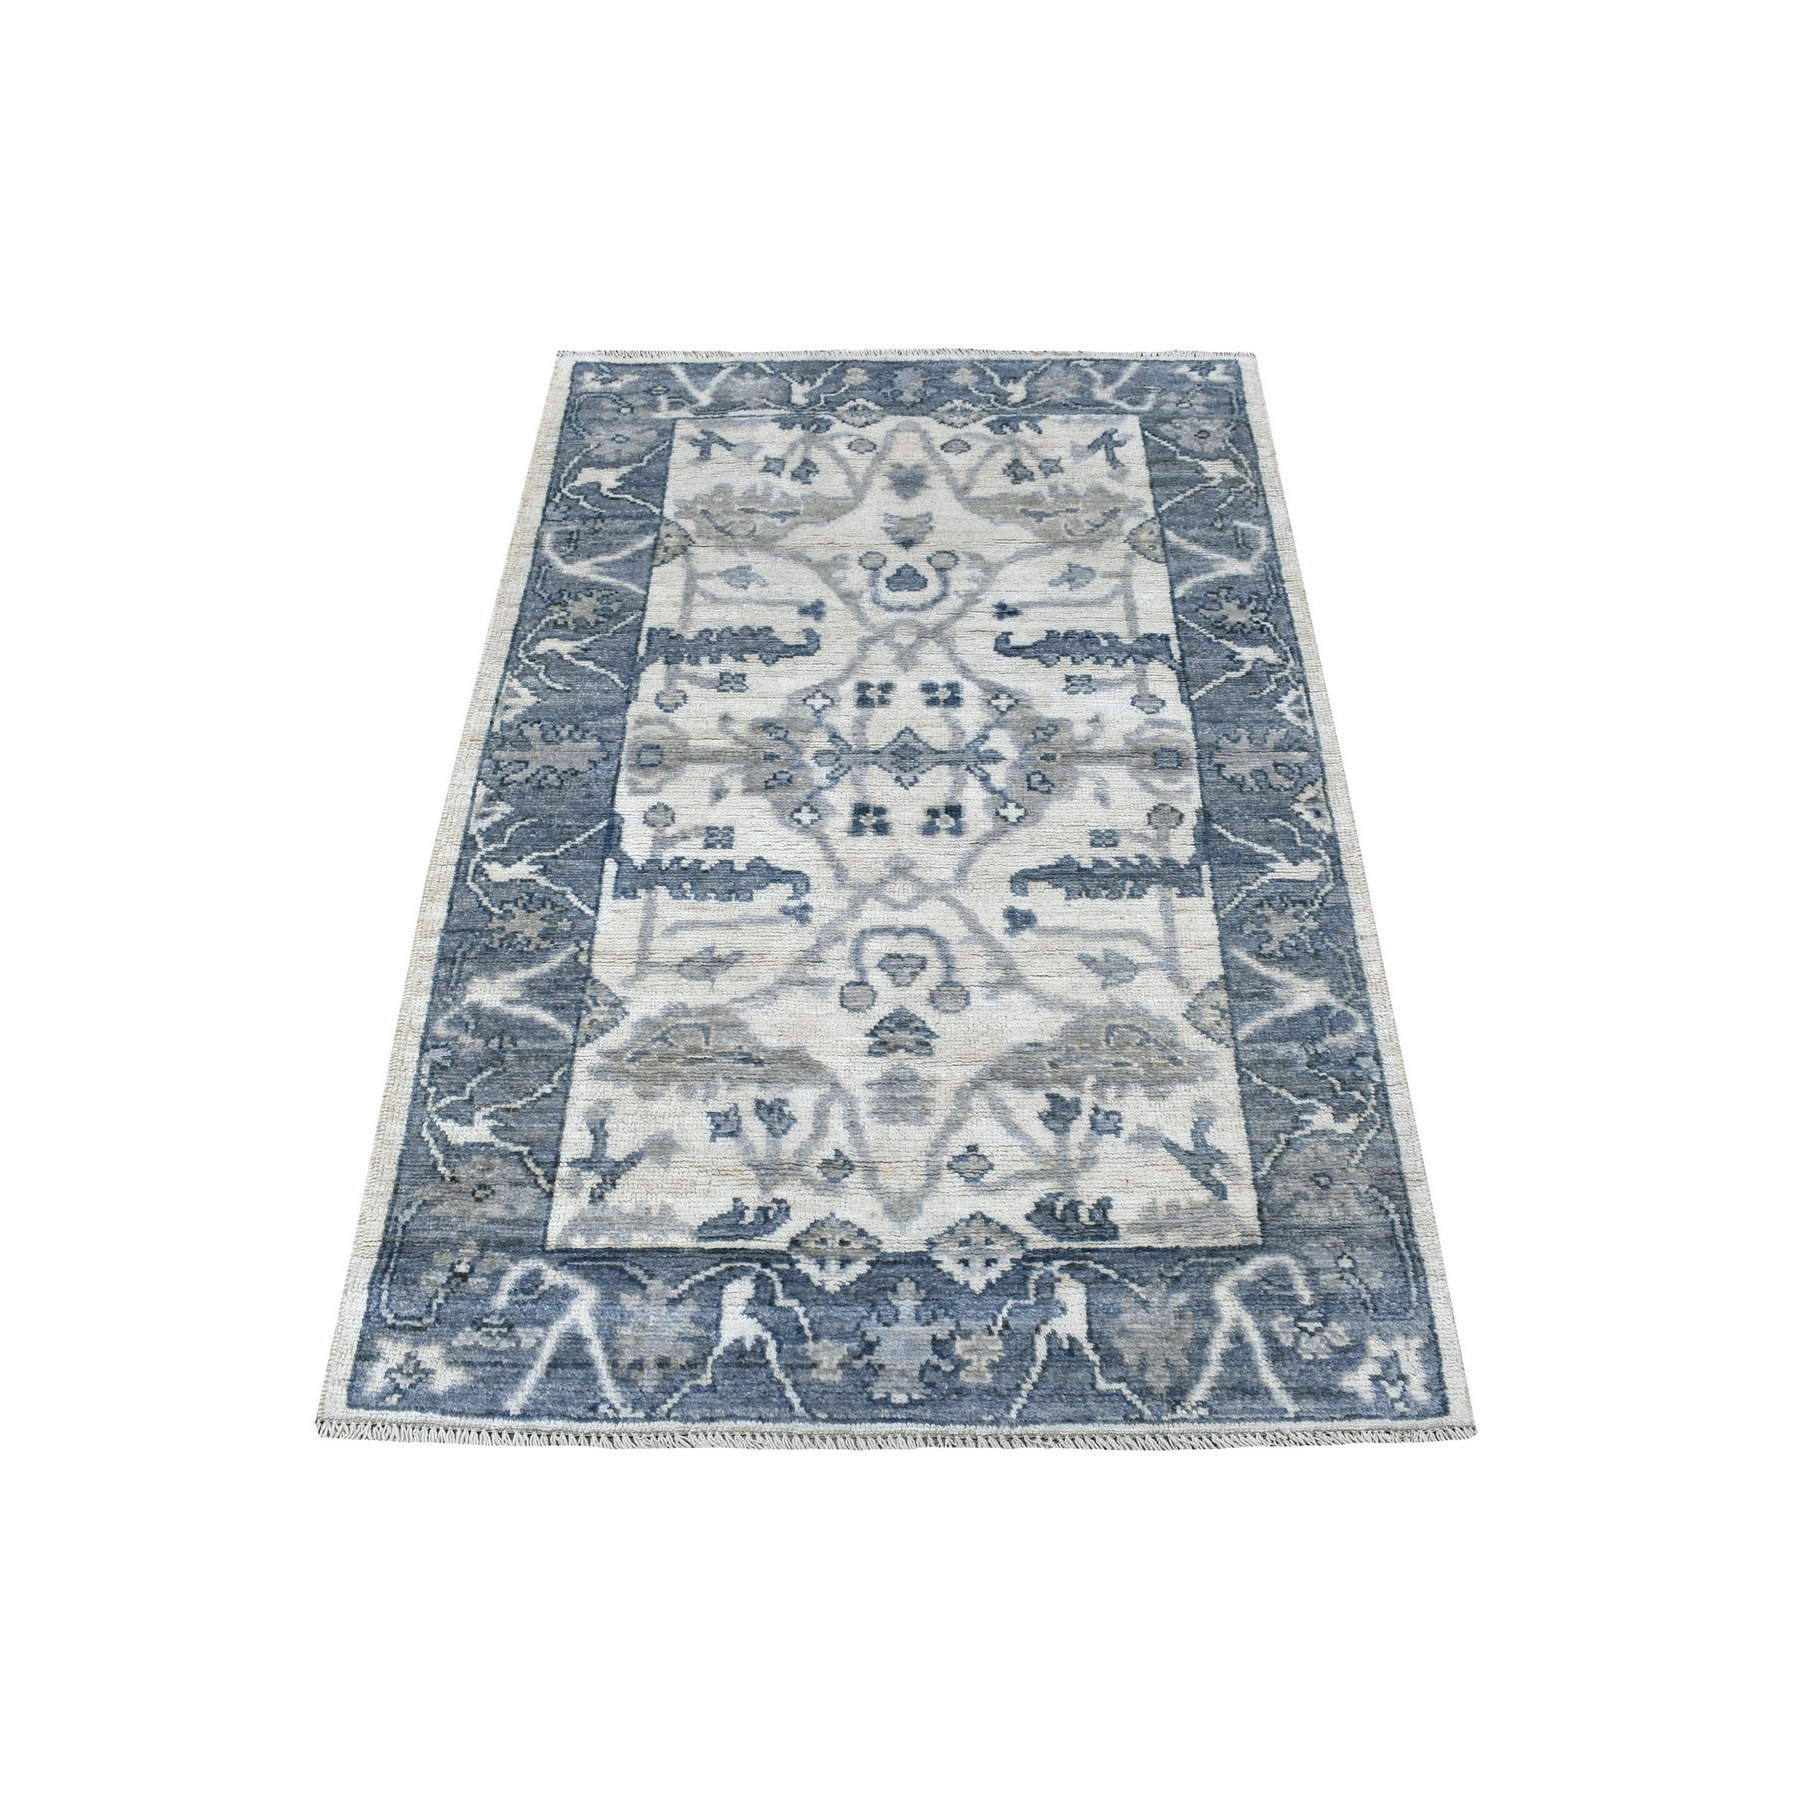 Agra And Turkish Collection Hand Knotted Ivory Rug No: 1134920